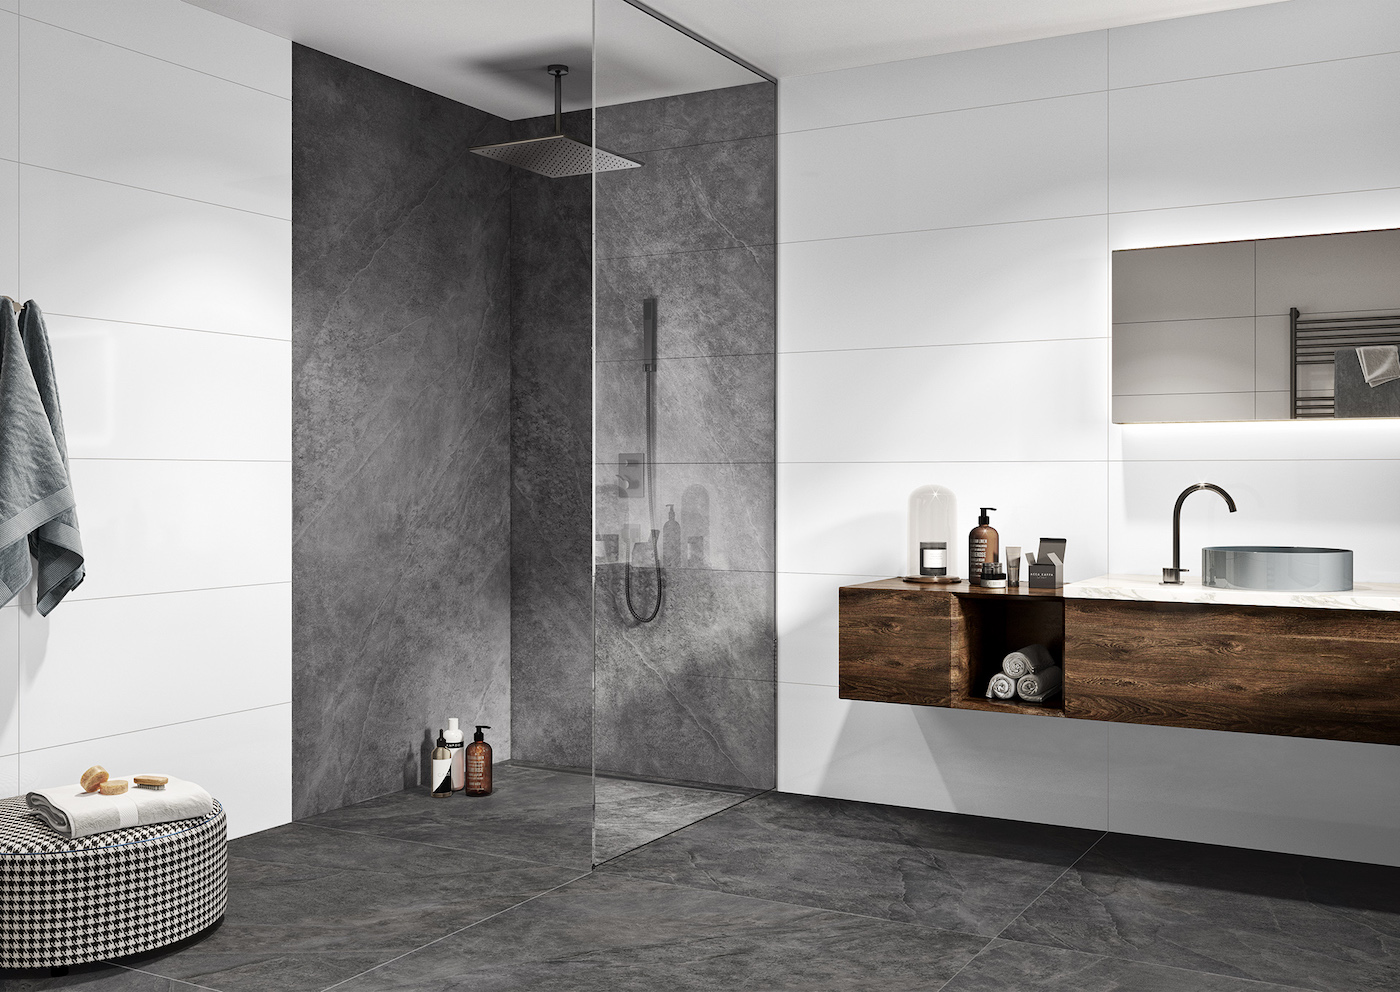 wall: Pure White #6MM Y12980001 white mat 40x120 wall tile, 6mm, Kalmit #6MM Y13815001 graphite 120x260 porcelain gres, 6mm